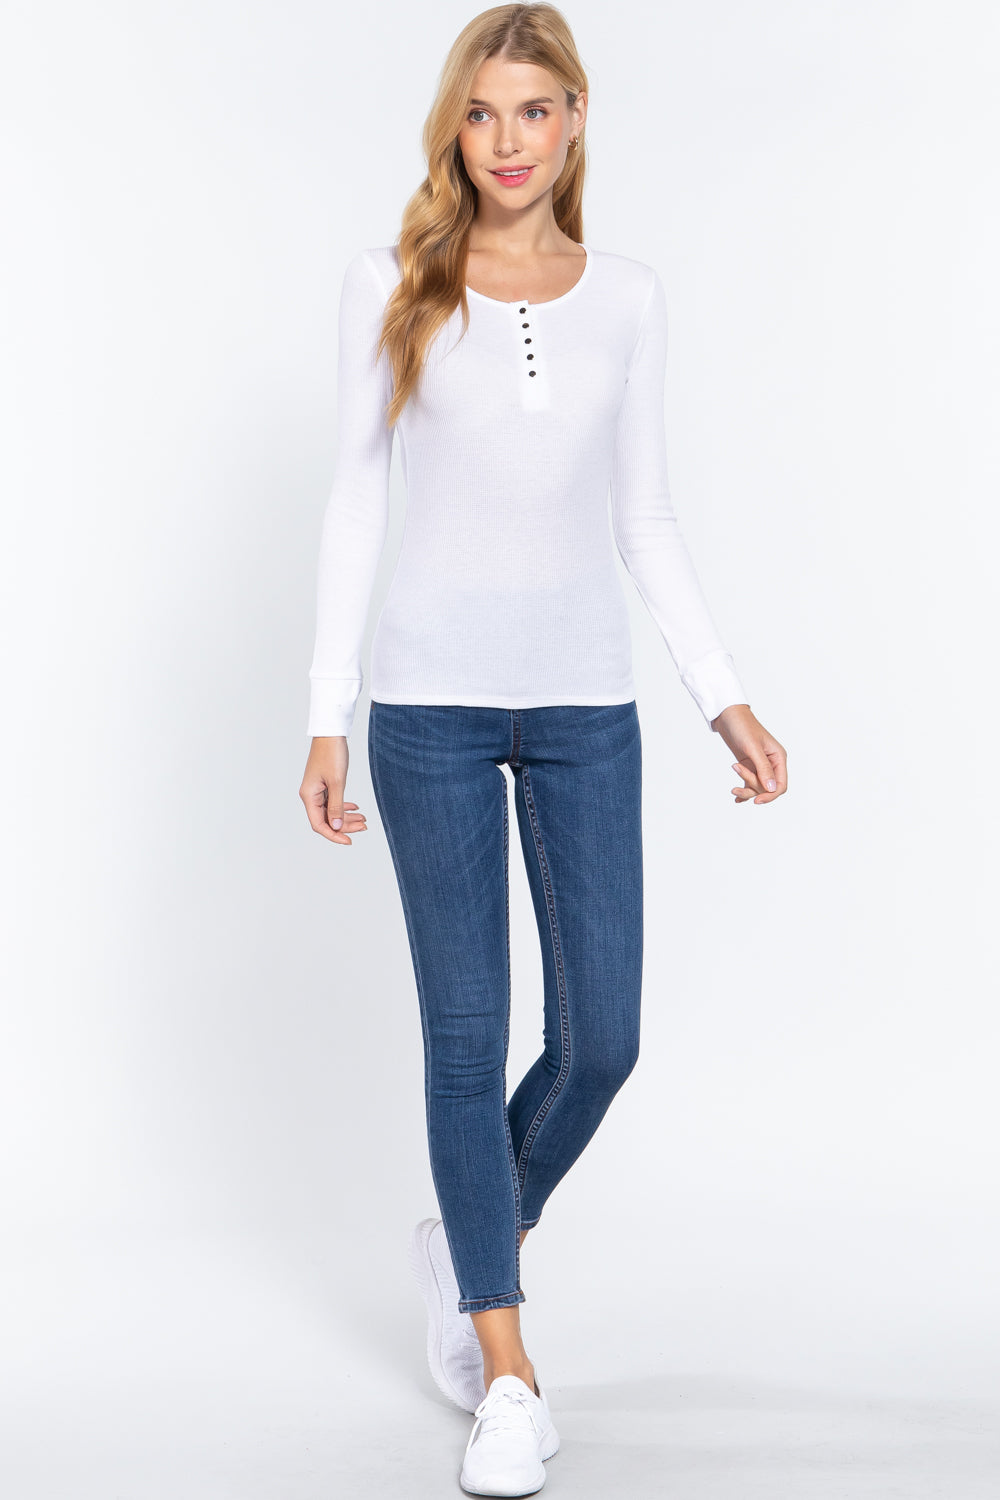 Long Slv Scoop Neck Thermal Top Sunny EvE Fashion